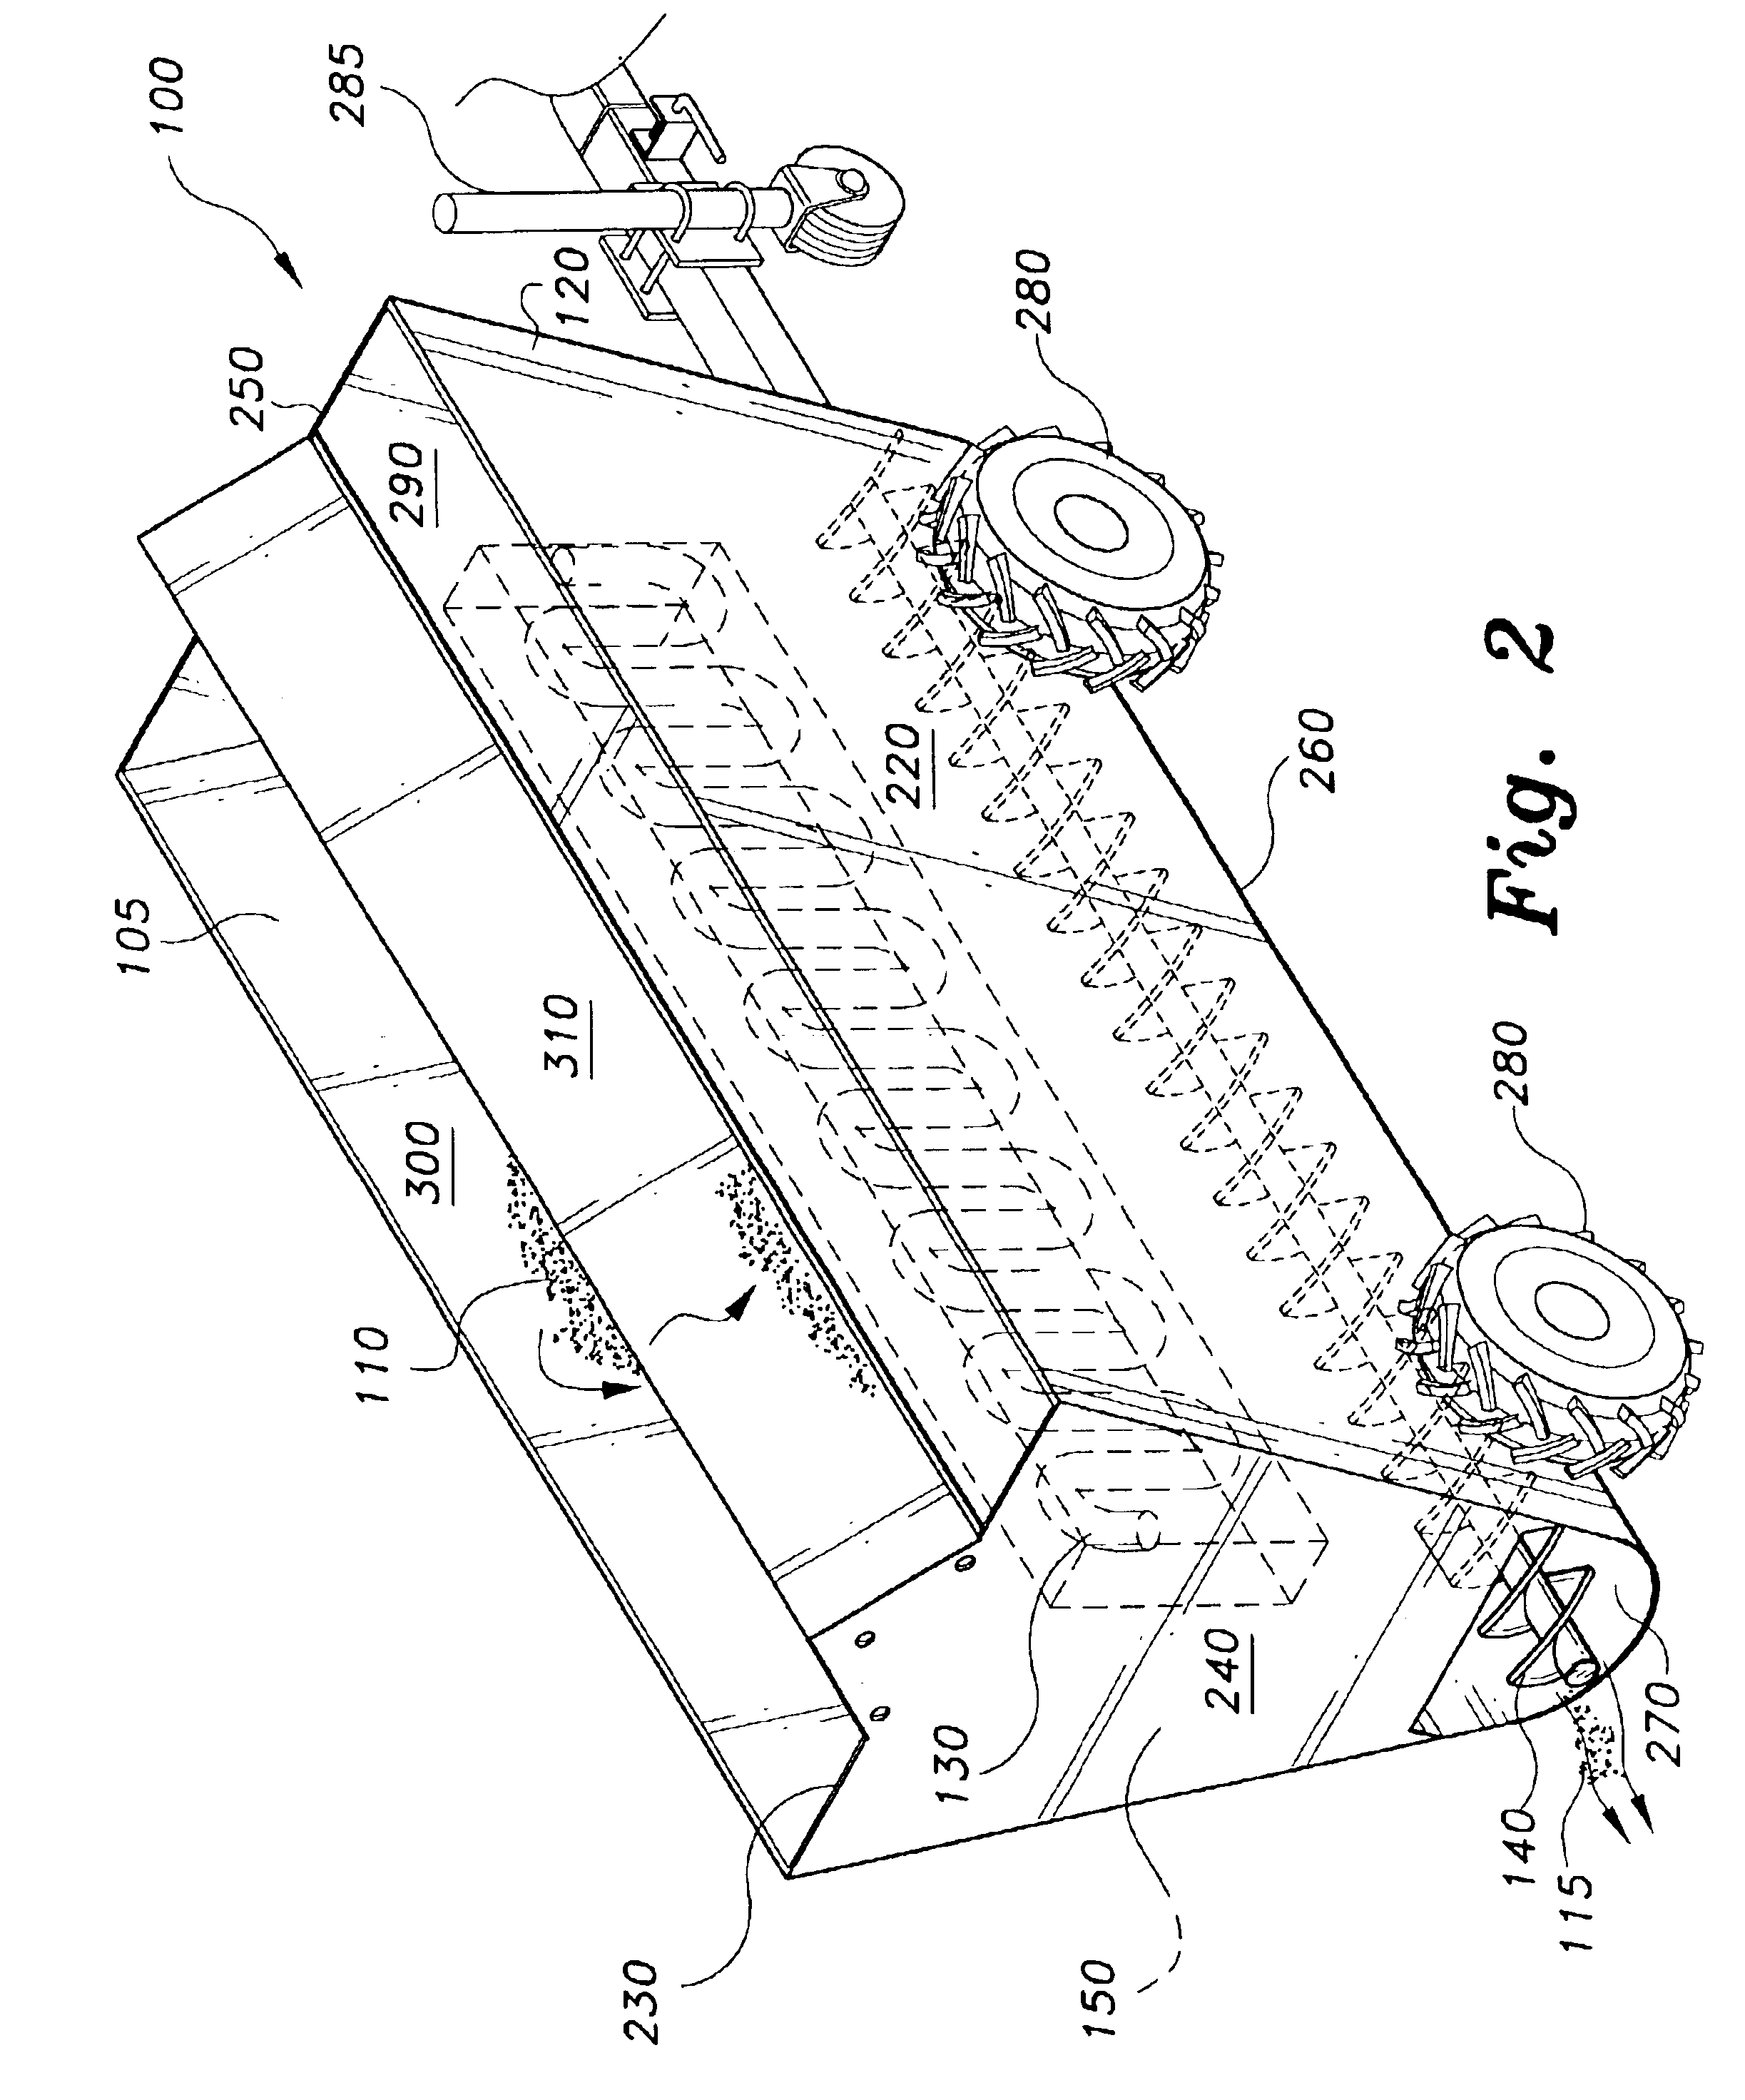 Apparatus and method for treating top soil